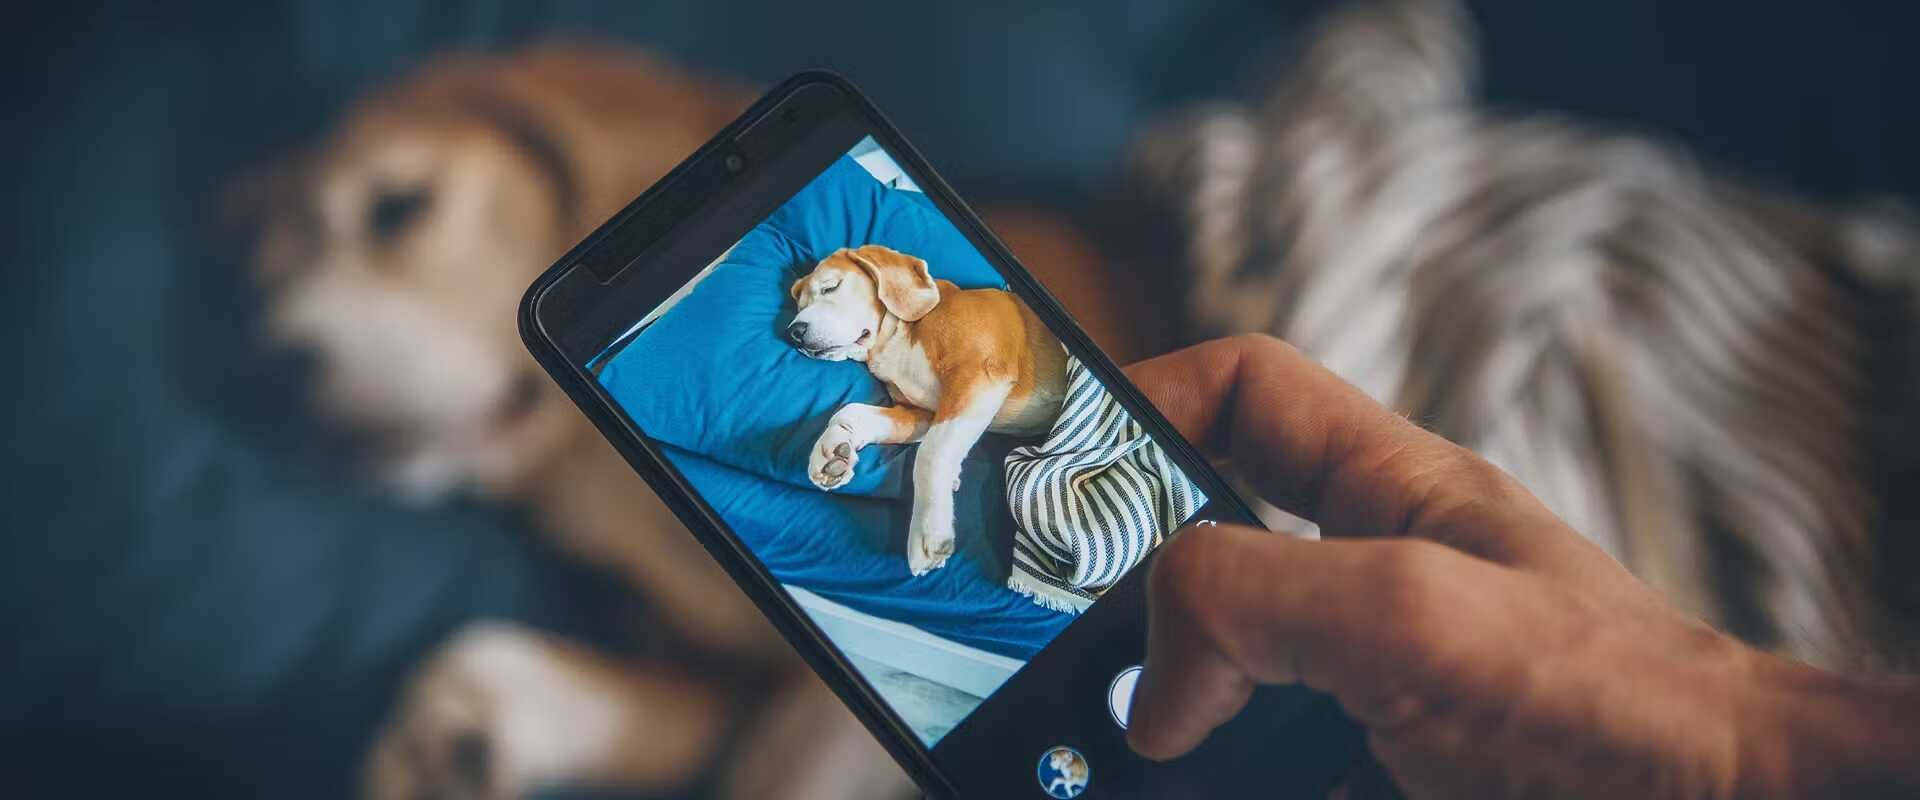 Taking a picture of a dog.